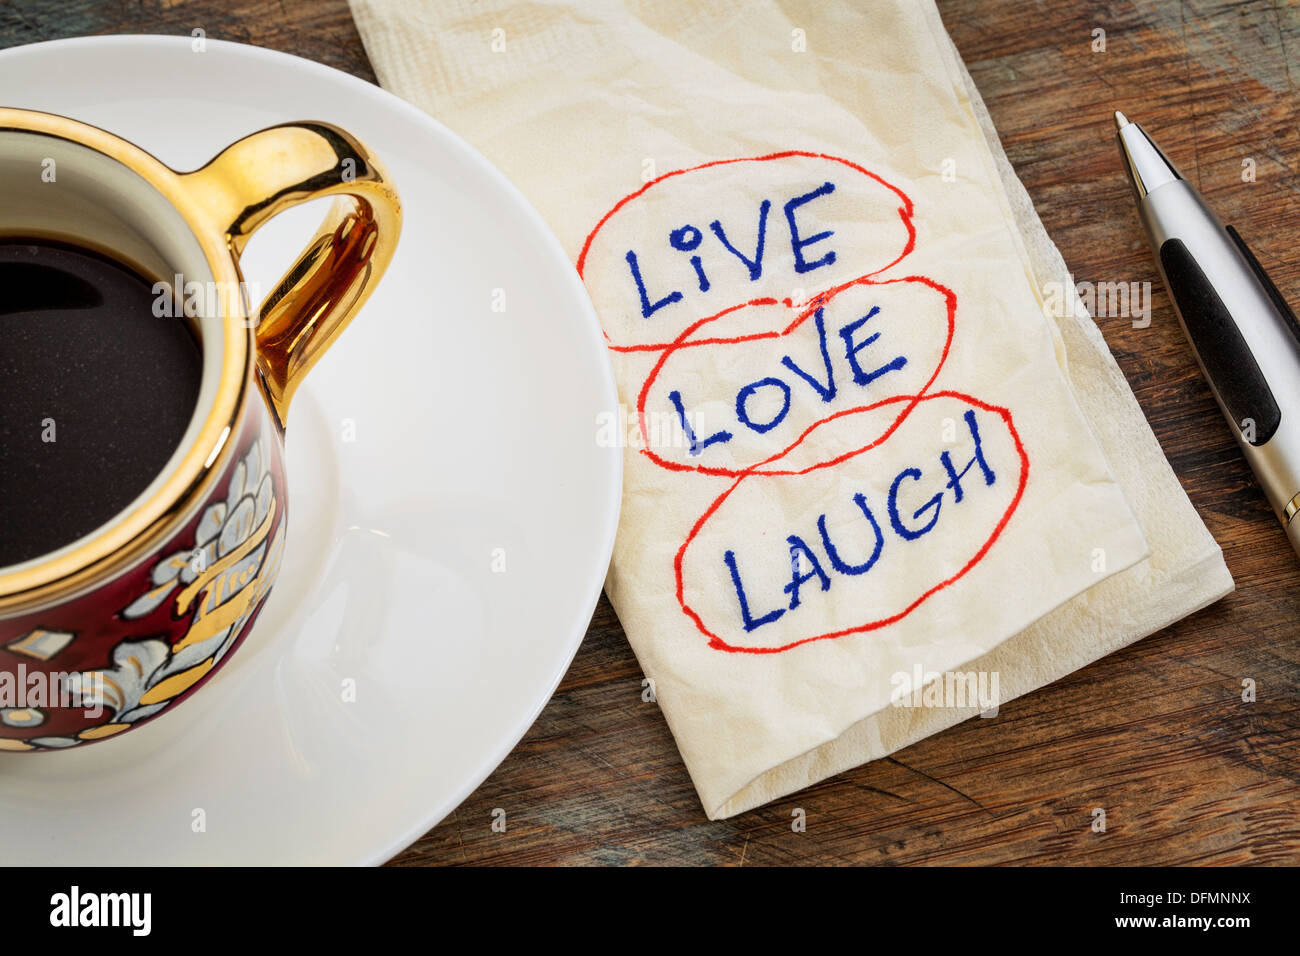 live, love, laugh - motivational words - a napkin doodle with a cup of espresso coffee Stock Photo